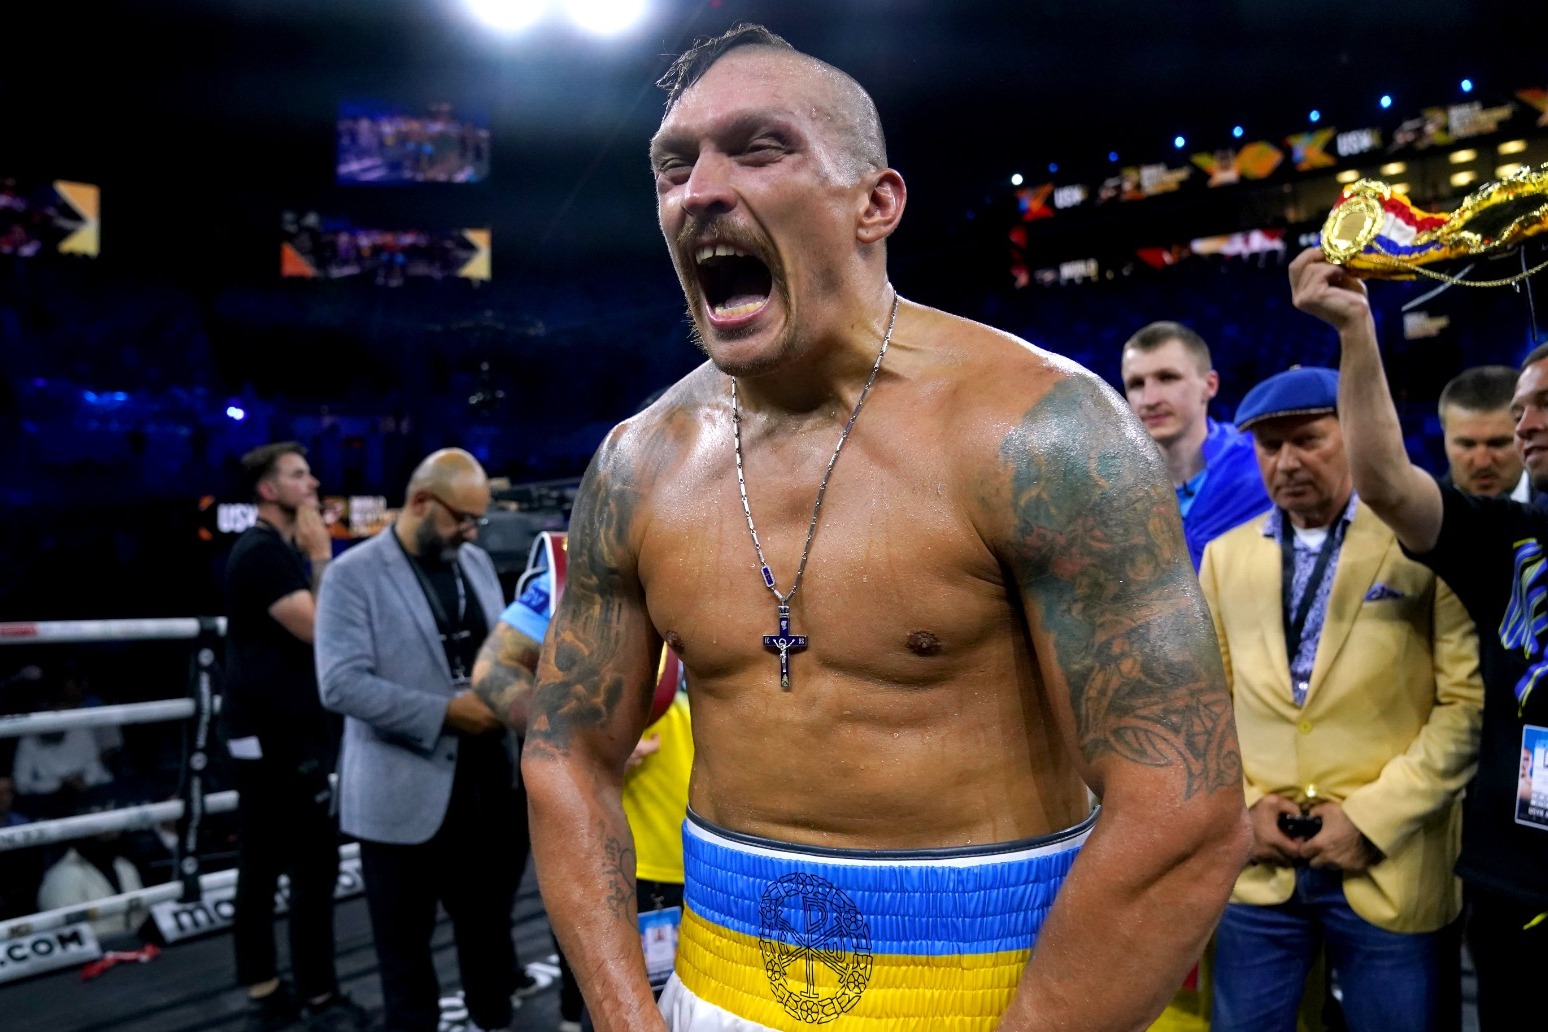 Oleksandr Usyk has sights set only on Tyson Fury and wants fight in early 2023 